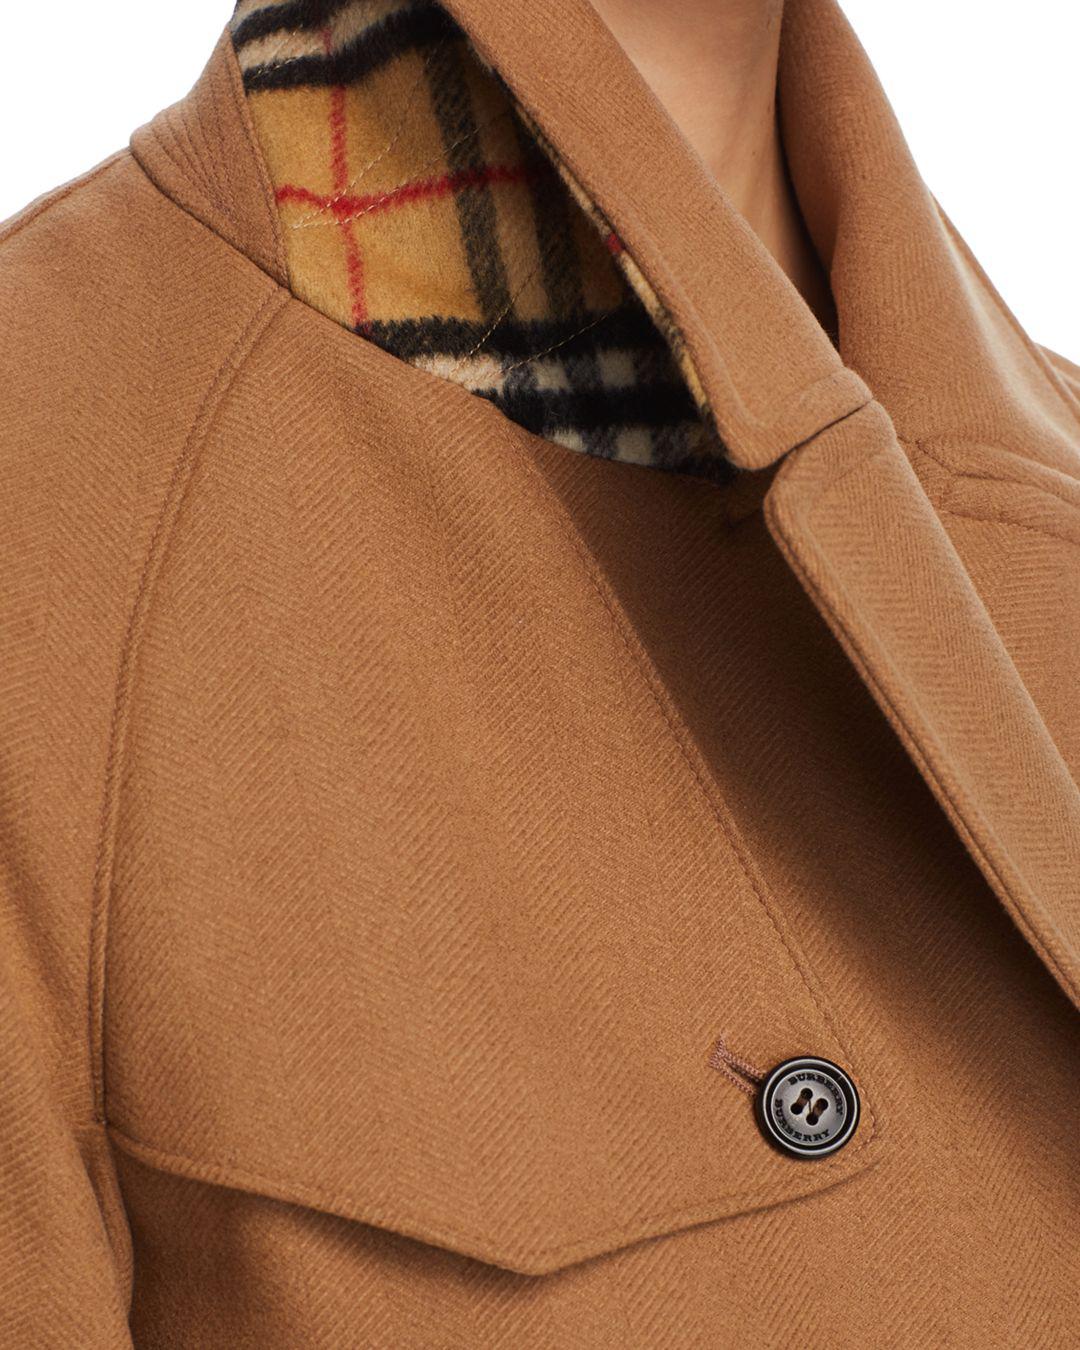 Burberry Cranston Trench Coat in Camel (Natural) - Lyst